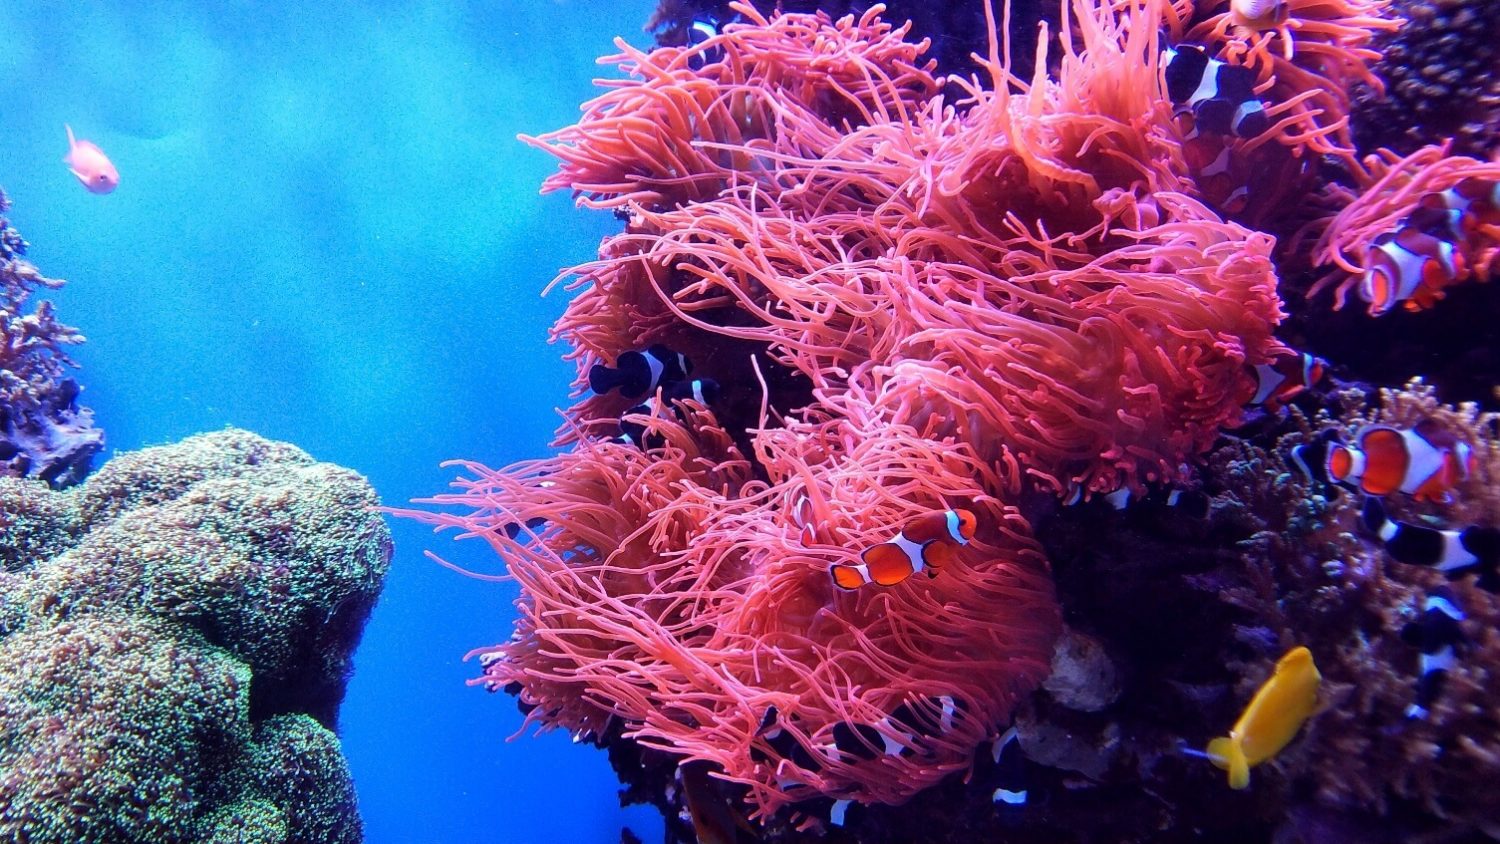 This Australian Tourism Company Is Regrowing the Great Barrier Reef